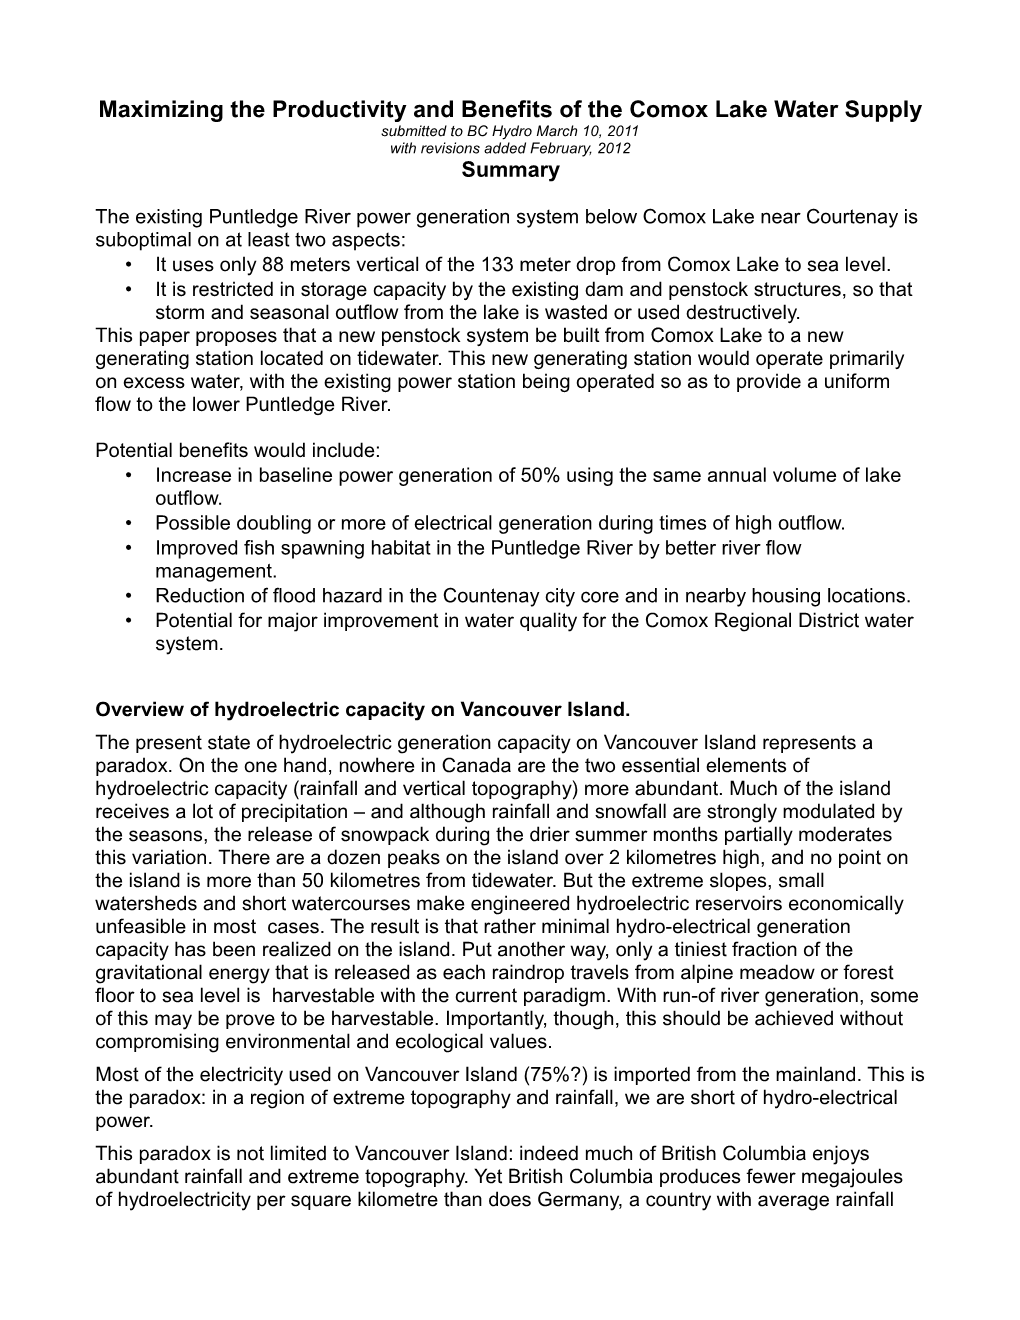 Maximizing the Productivity and Benefits of the Comox Lake Water Supply Submitted to BC Hydro March 10, 2011 with Revisions Added February, 2012 Summary